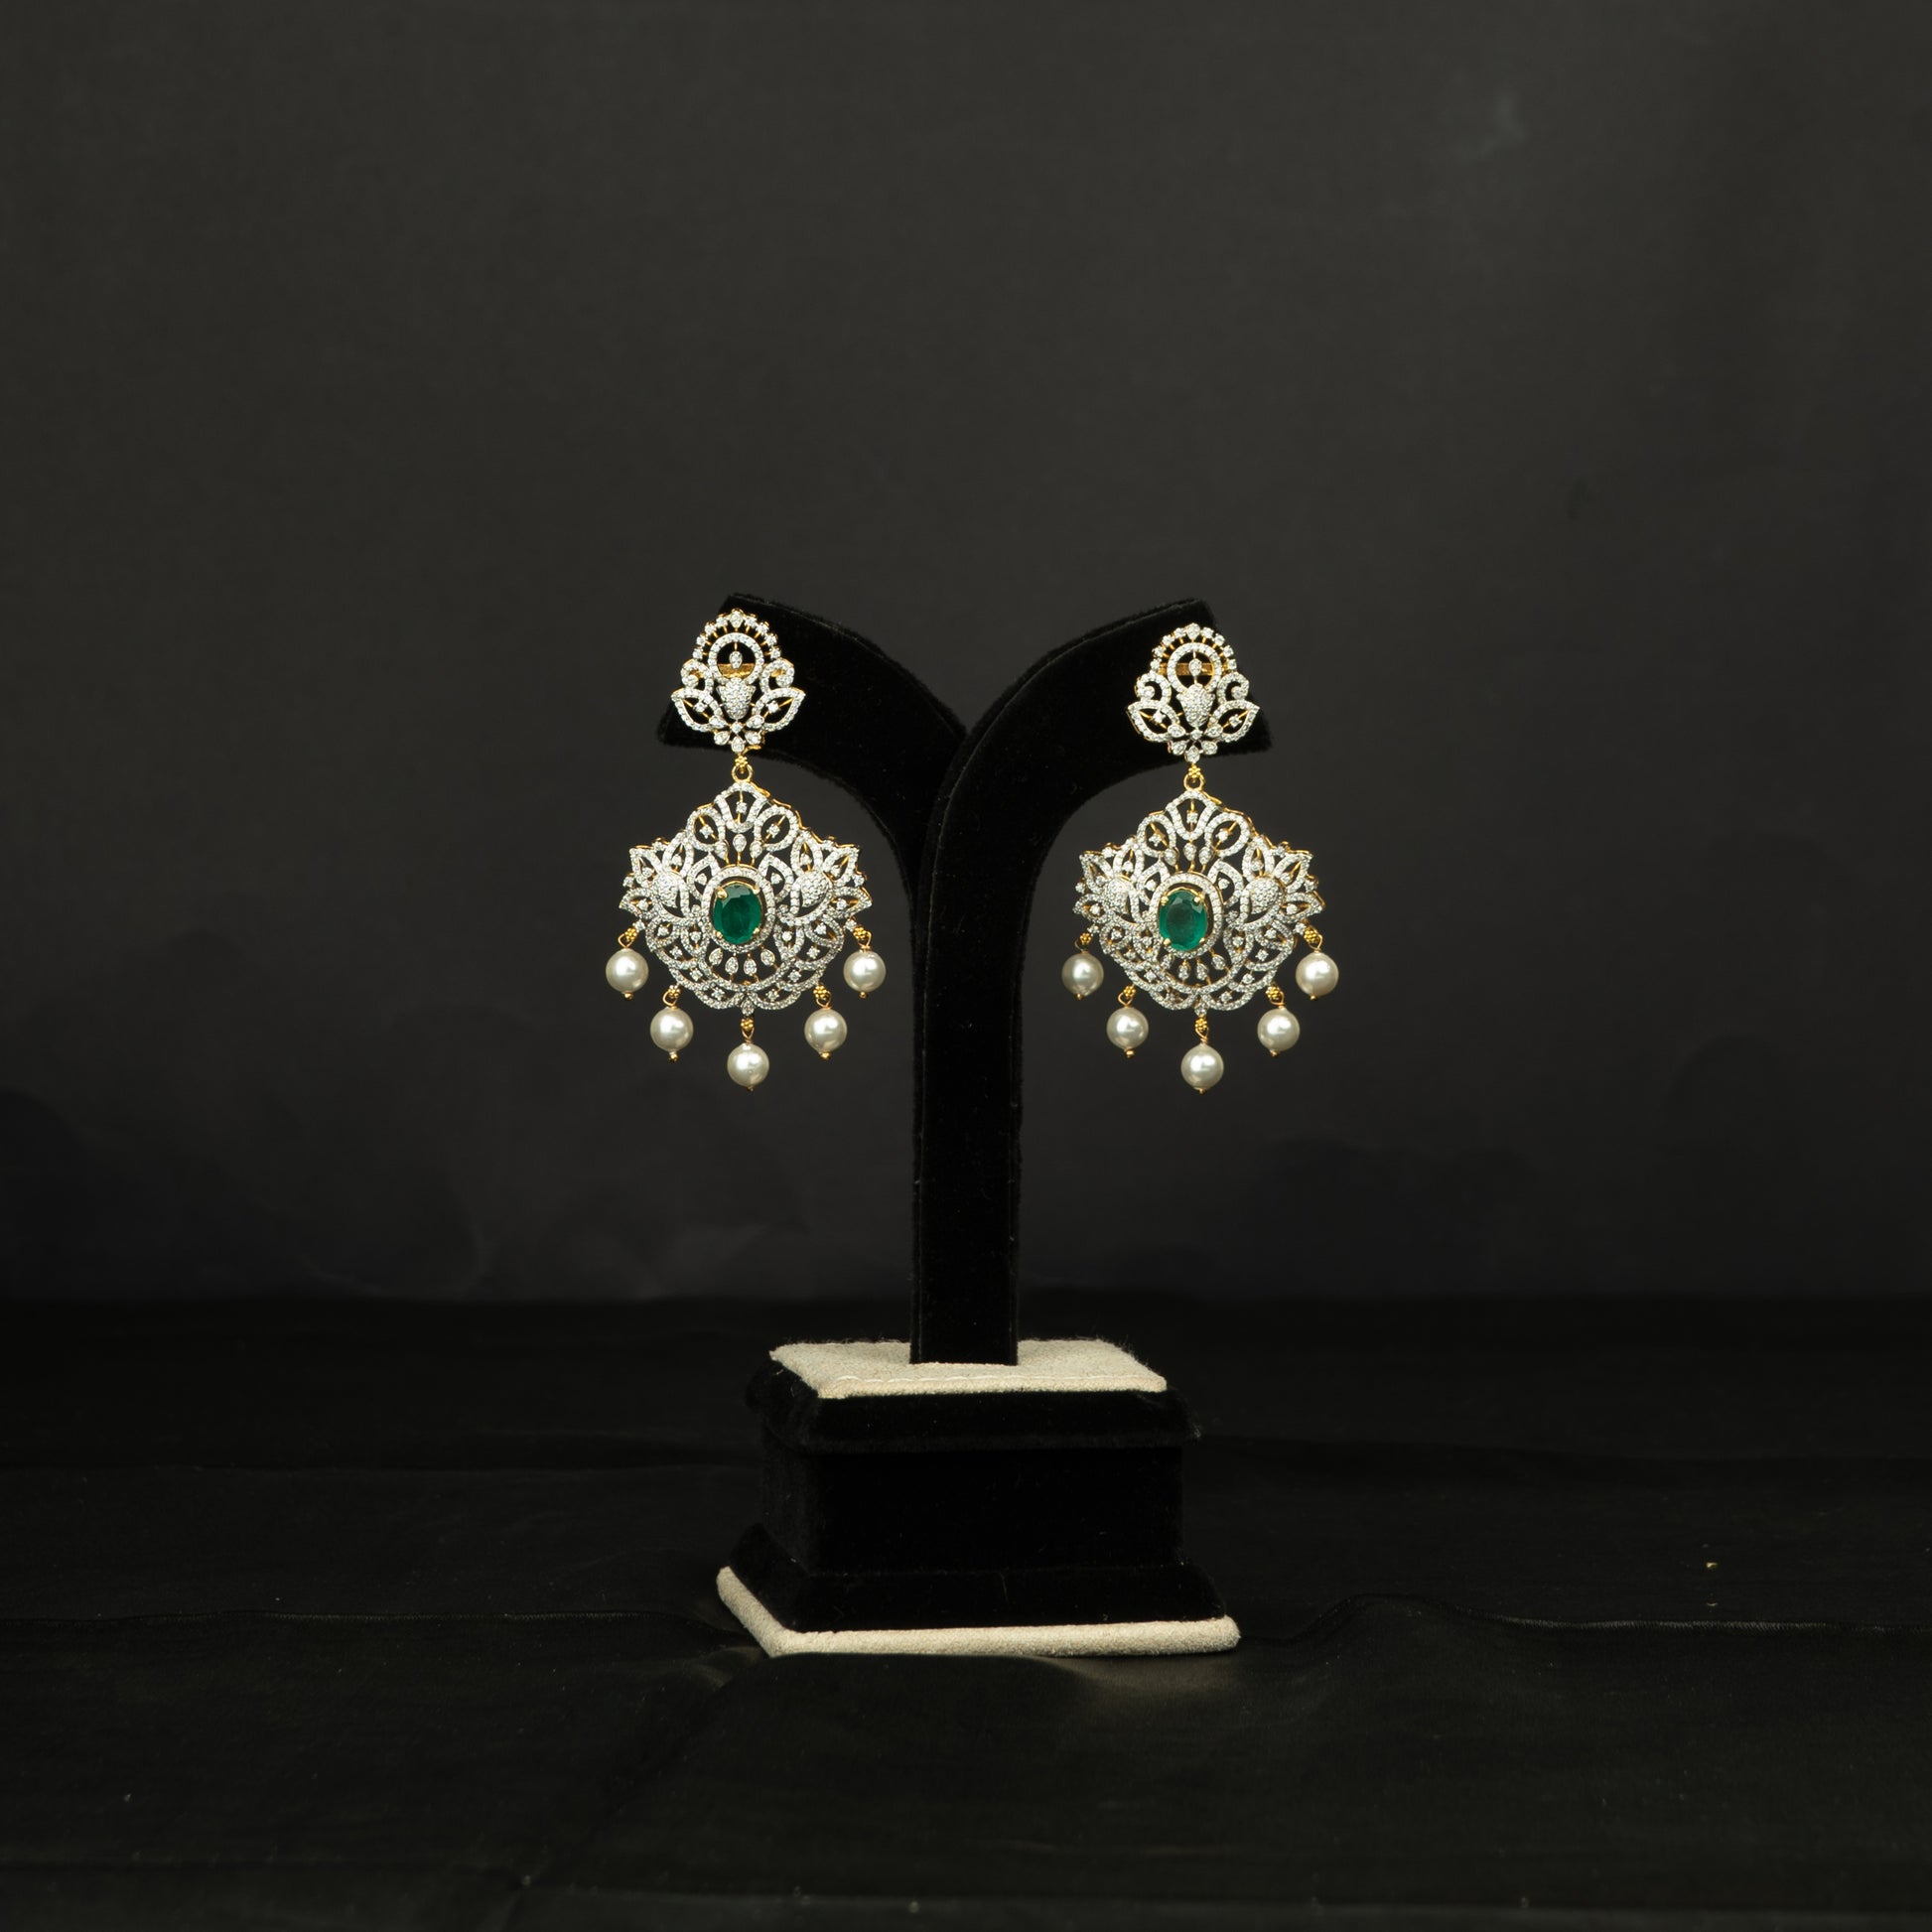 Triya Silver Earrings, crafted with premium gold-plated 92.5 silver featuring timeless beads, cubic zirconia, and emerald stones